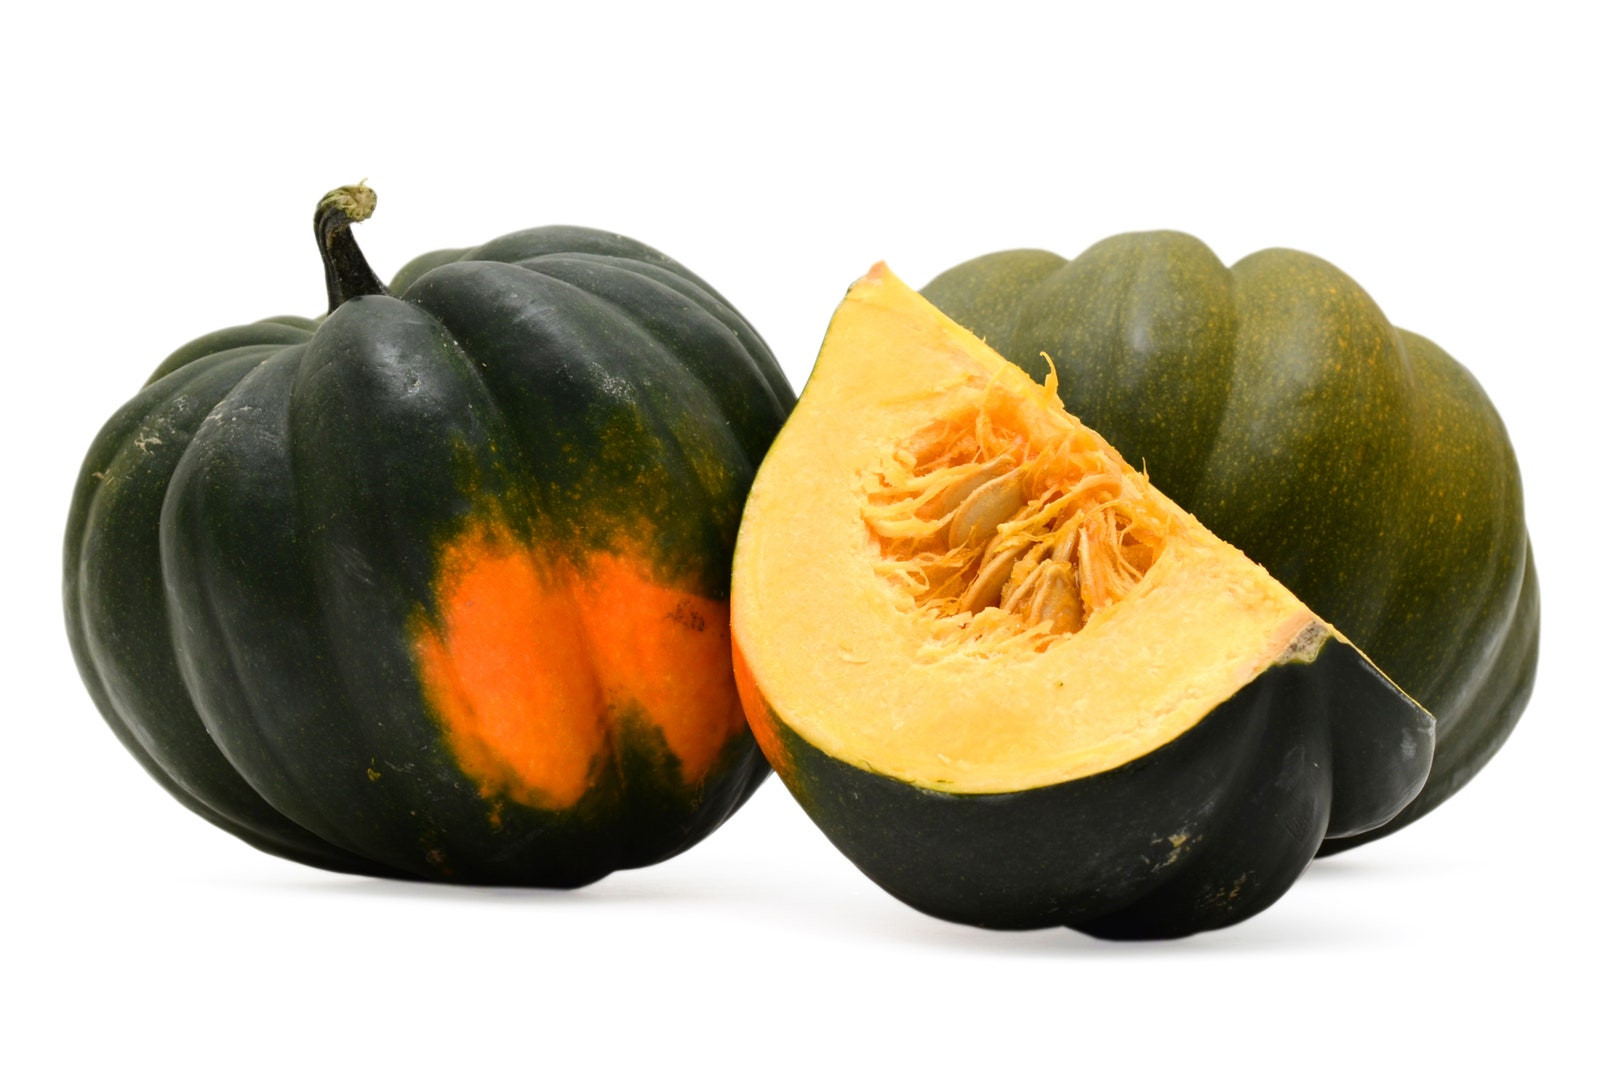 Winter Squash Varieties
 A Visual Guide to Winter Squash Varieties